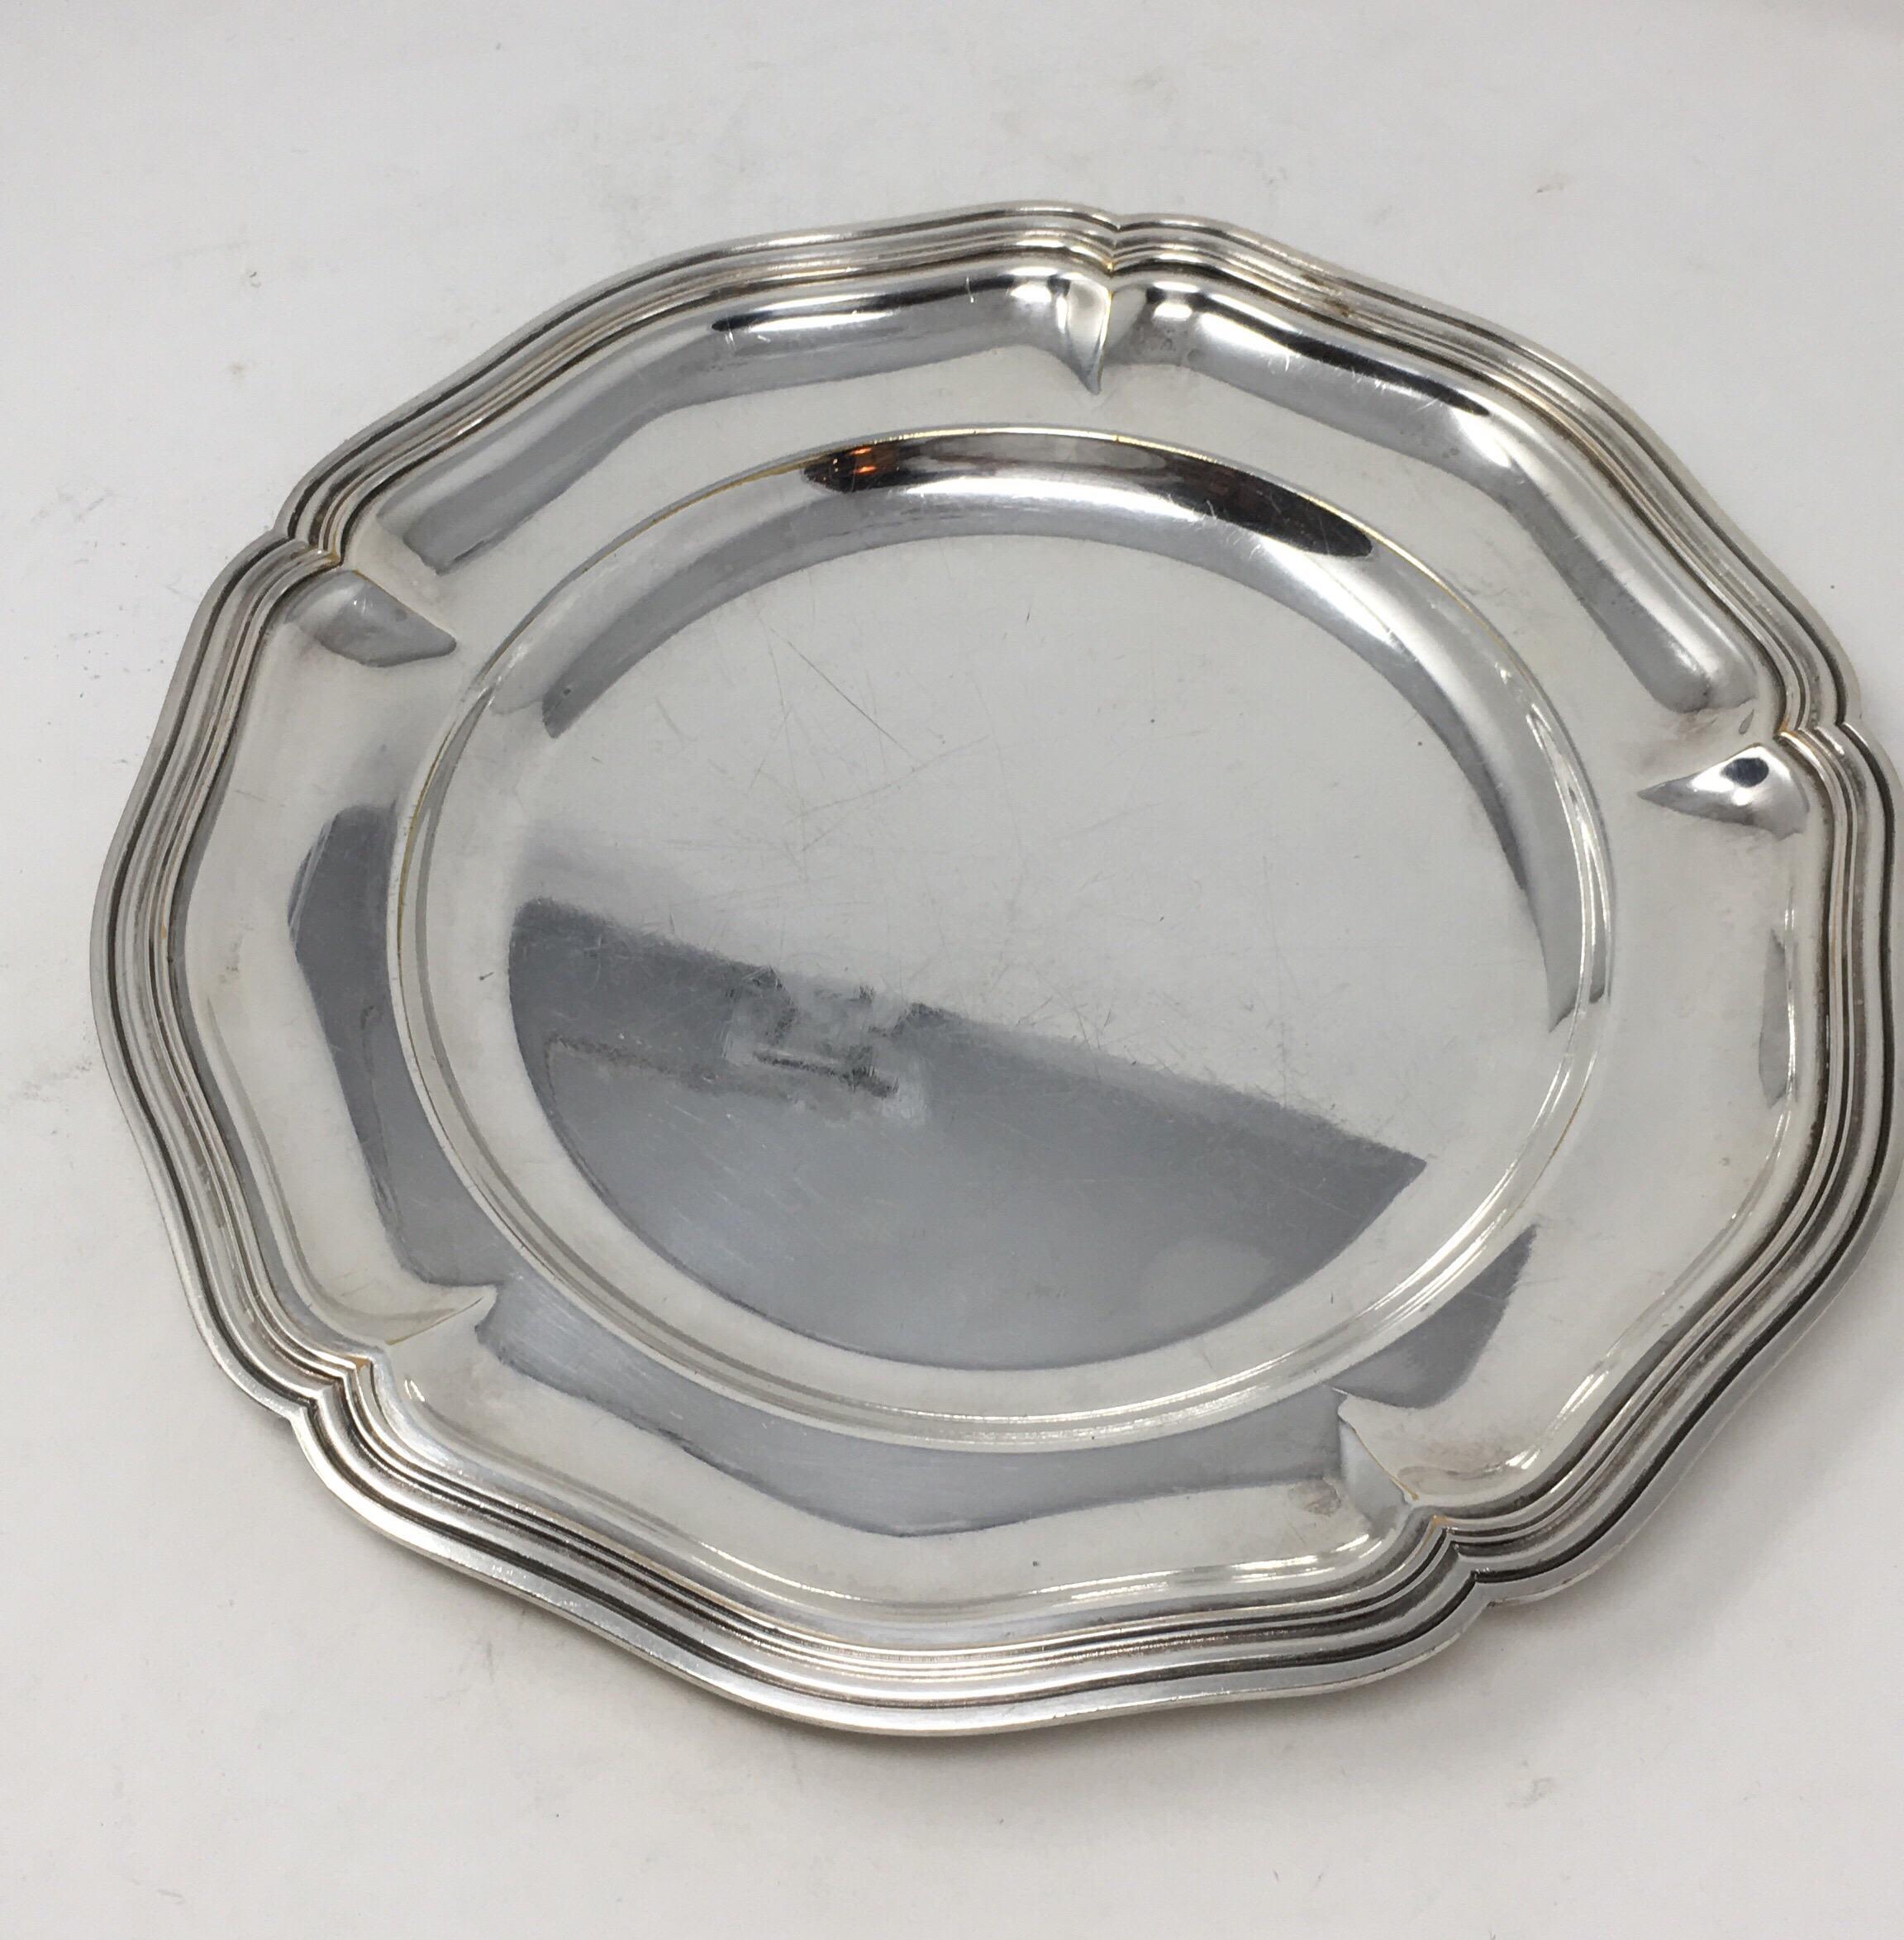 Found in France, this vintage hotel silver serving platter with beautifully detailed edge, has a great aged patina. It would be wonderful in a cabinet and a great addition to your table or buffet.